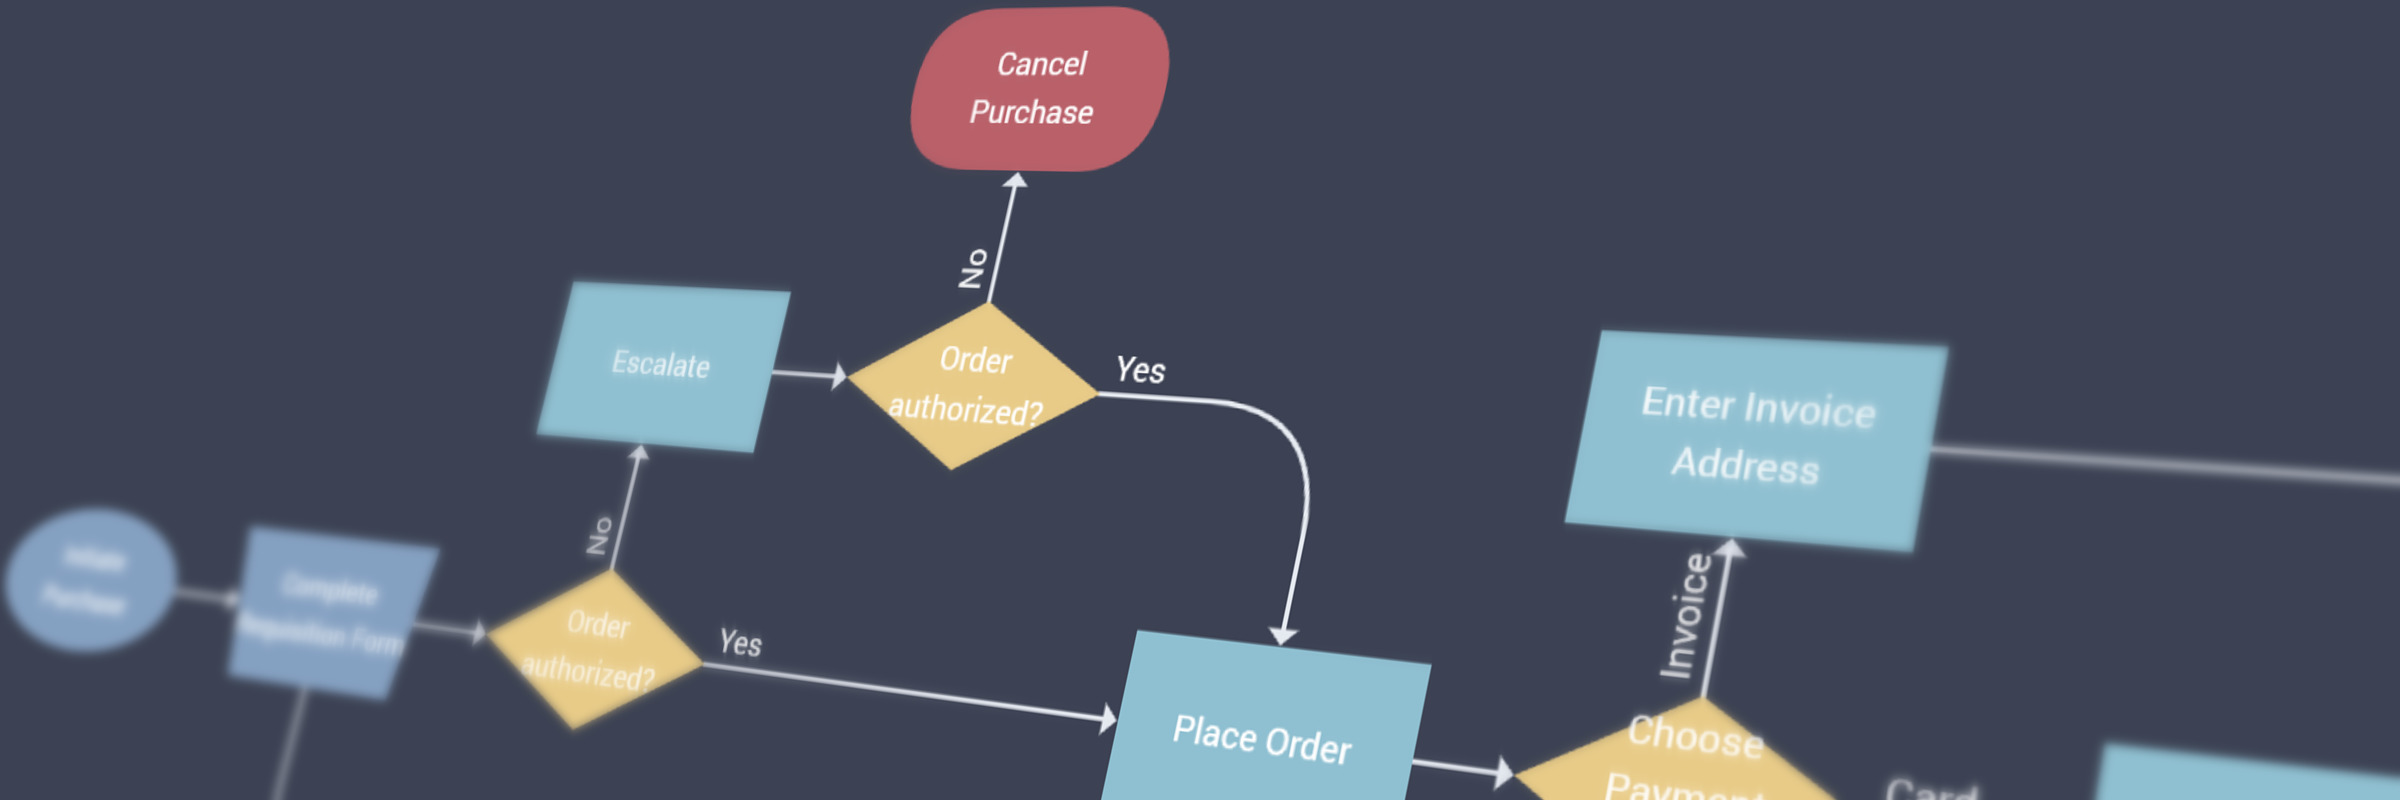 Hero image for Visualizing Flowcharts with JavaScript